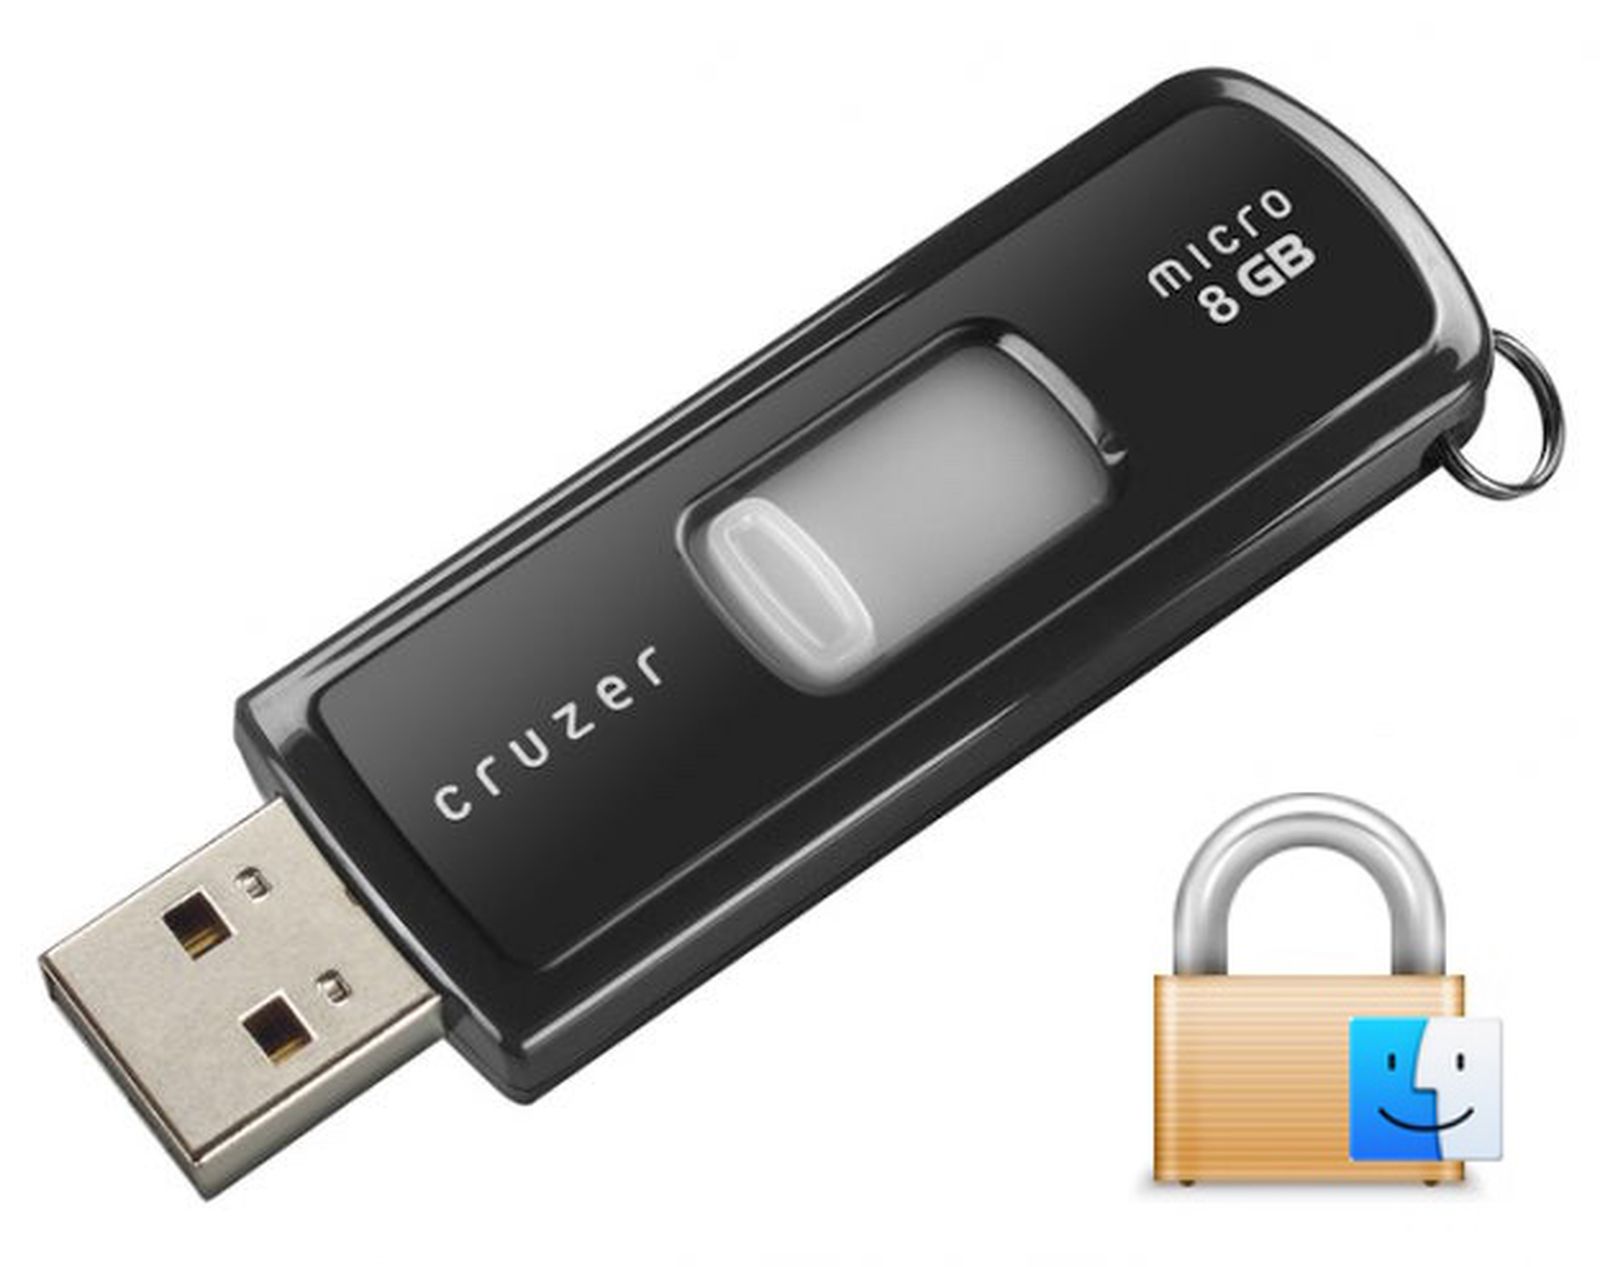 flash drive encryption software for mac and windows